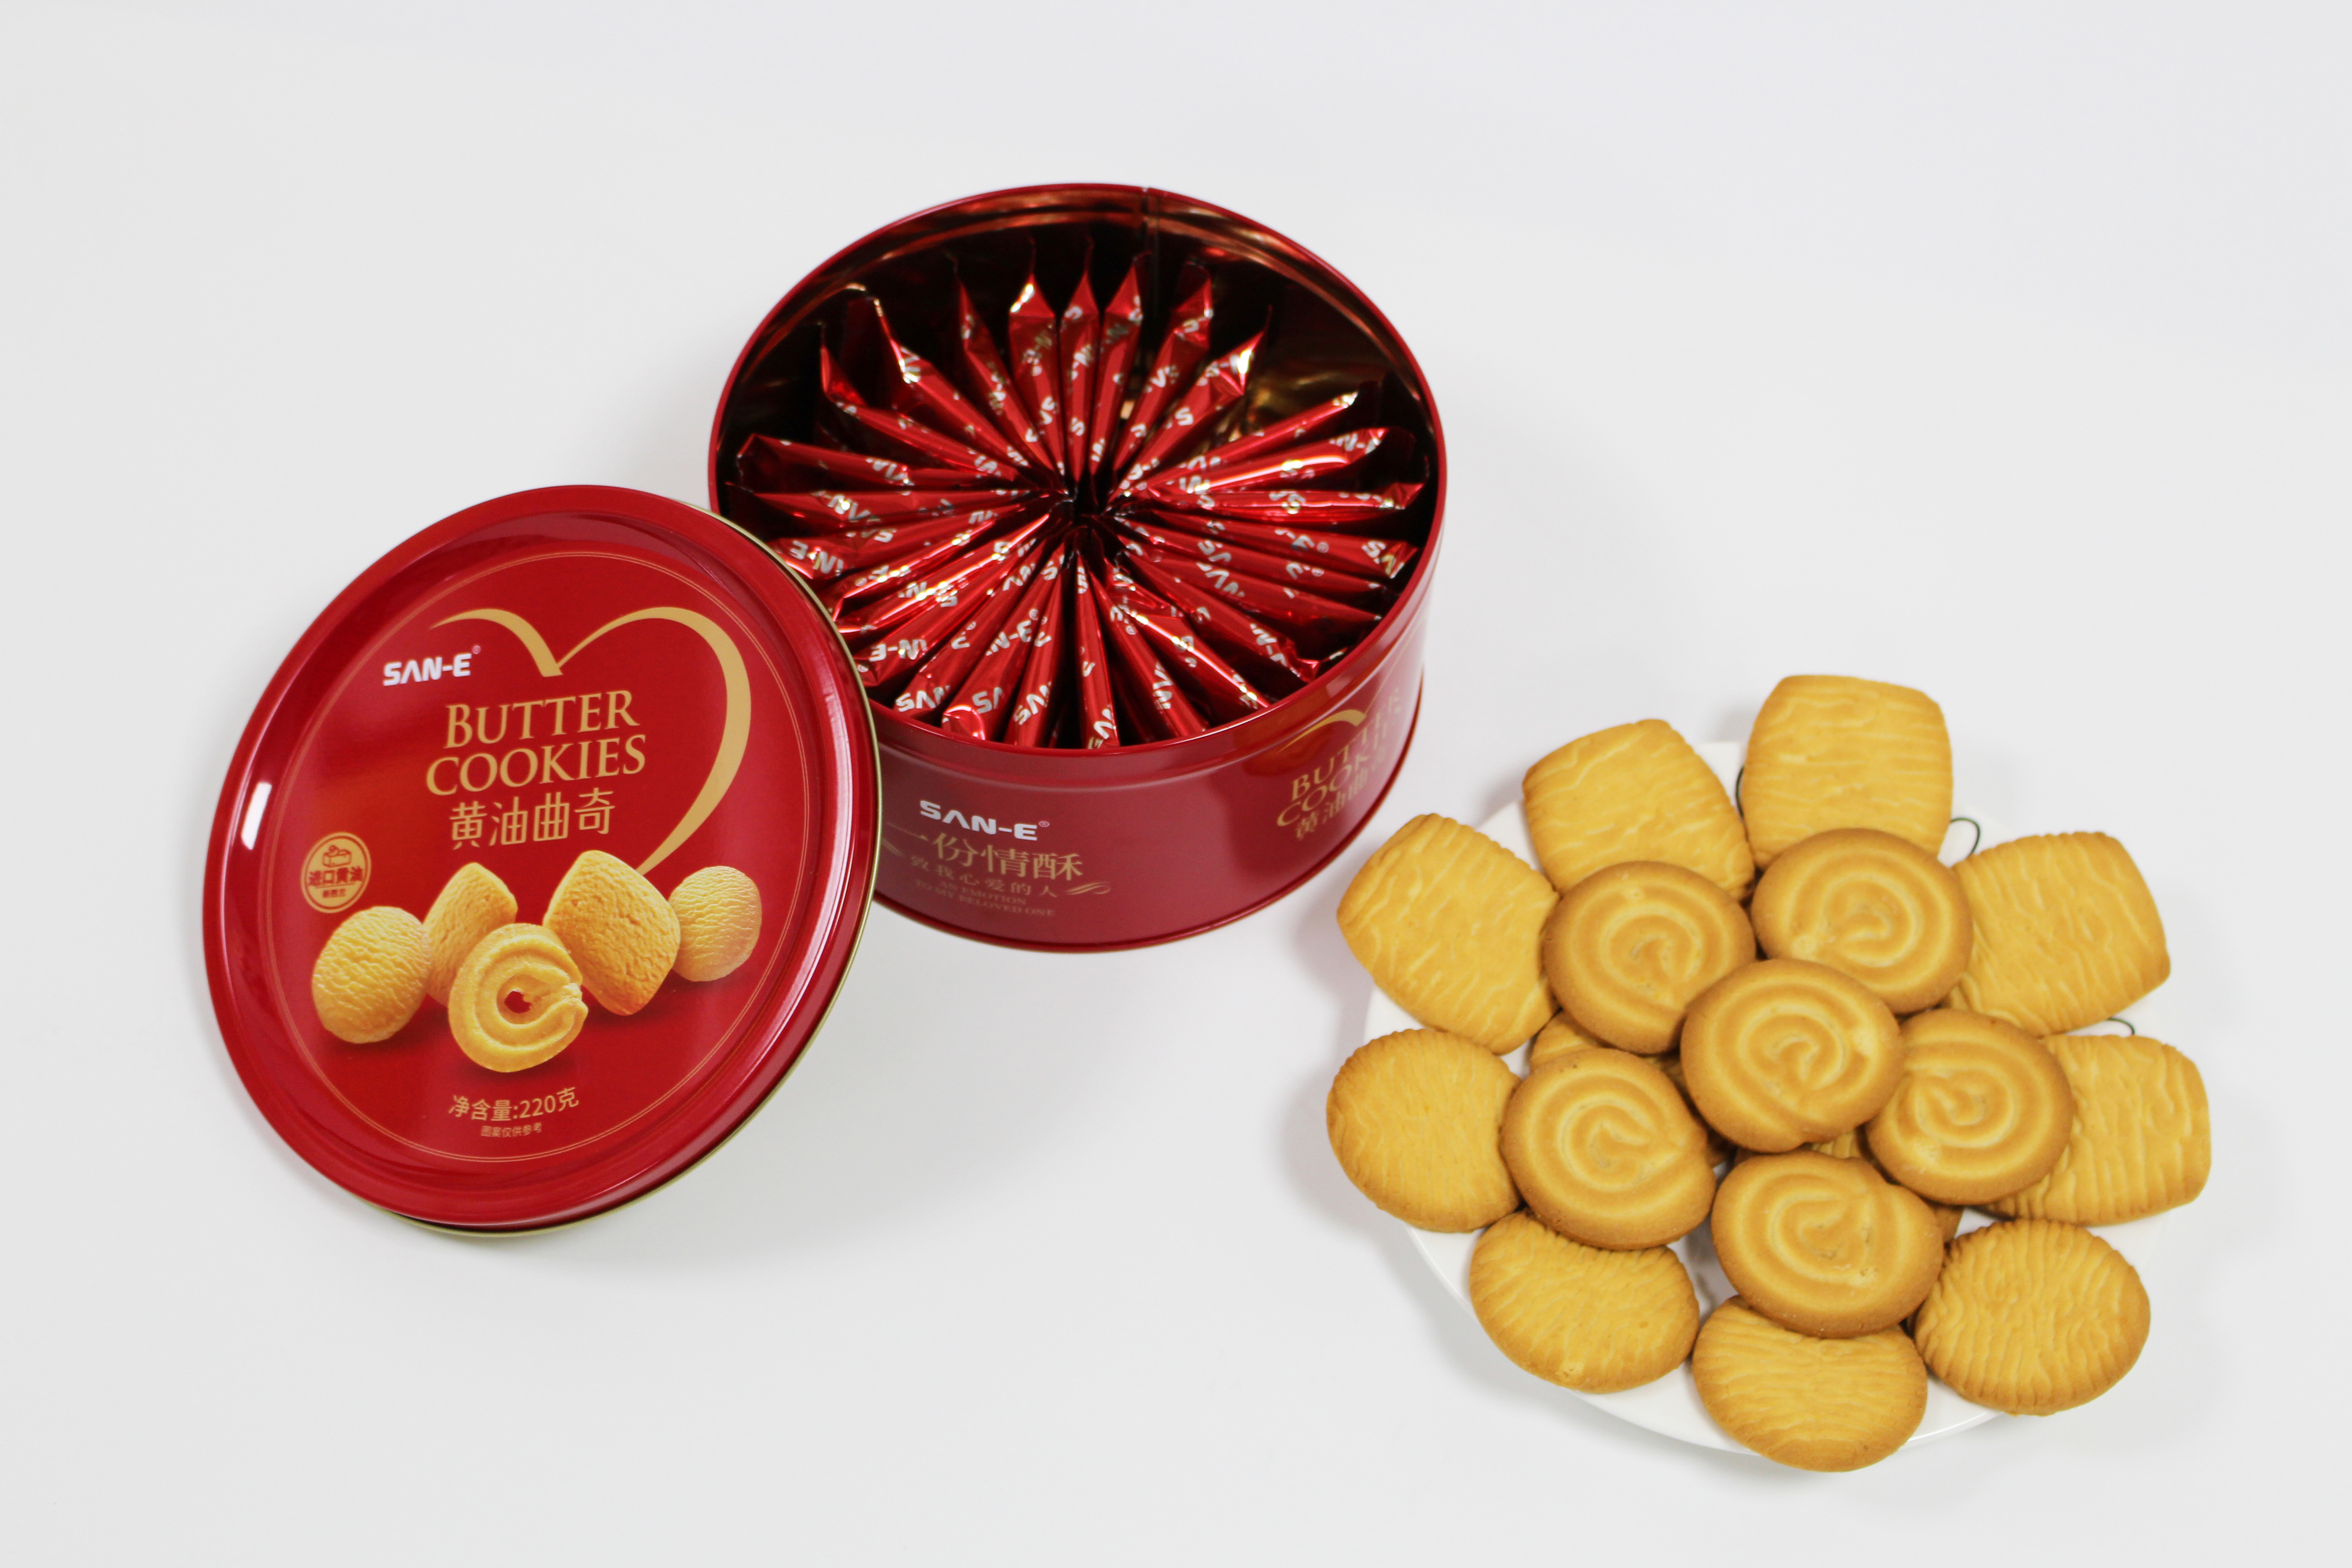 220g butter Cookie with tin